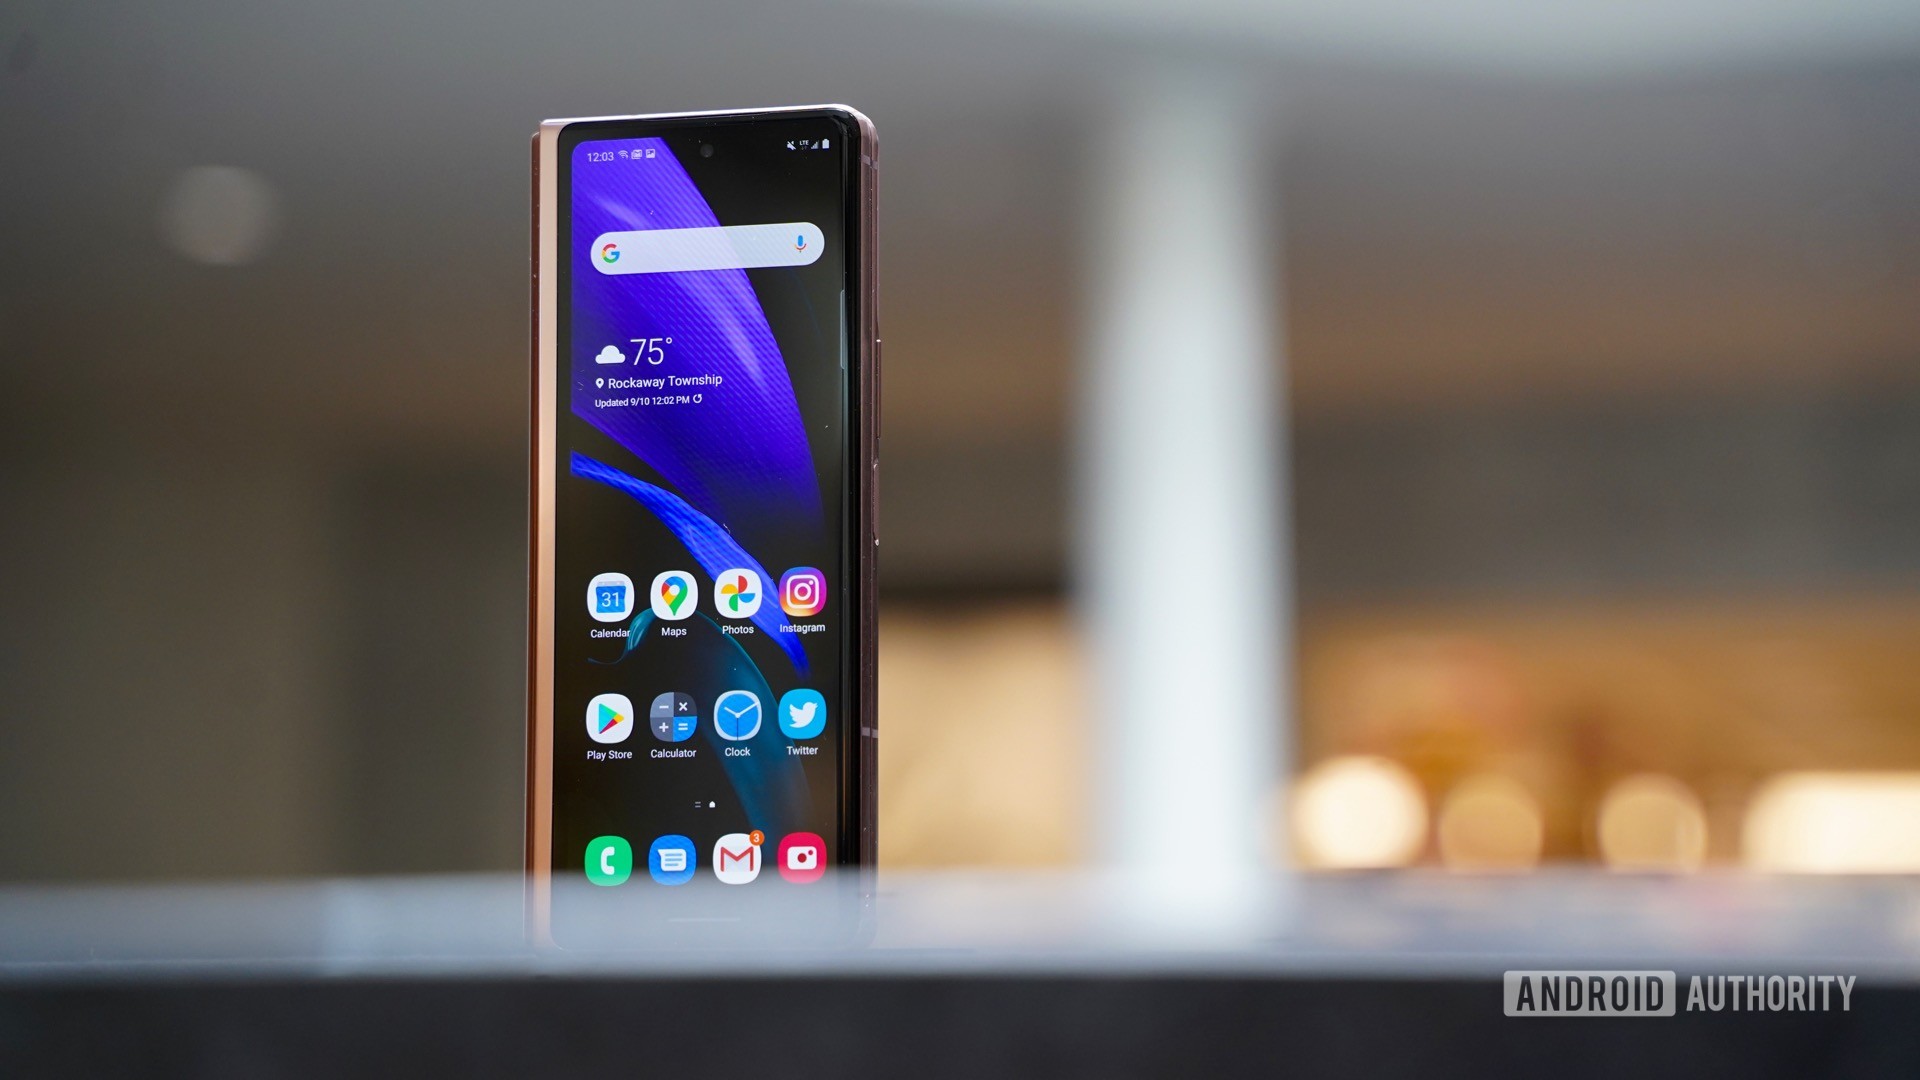 Samsung Galaxy Z Fold 2 buyer's guide: All the info you need